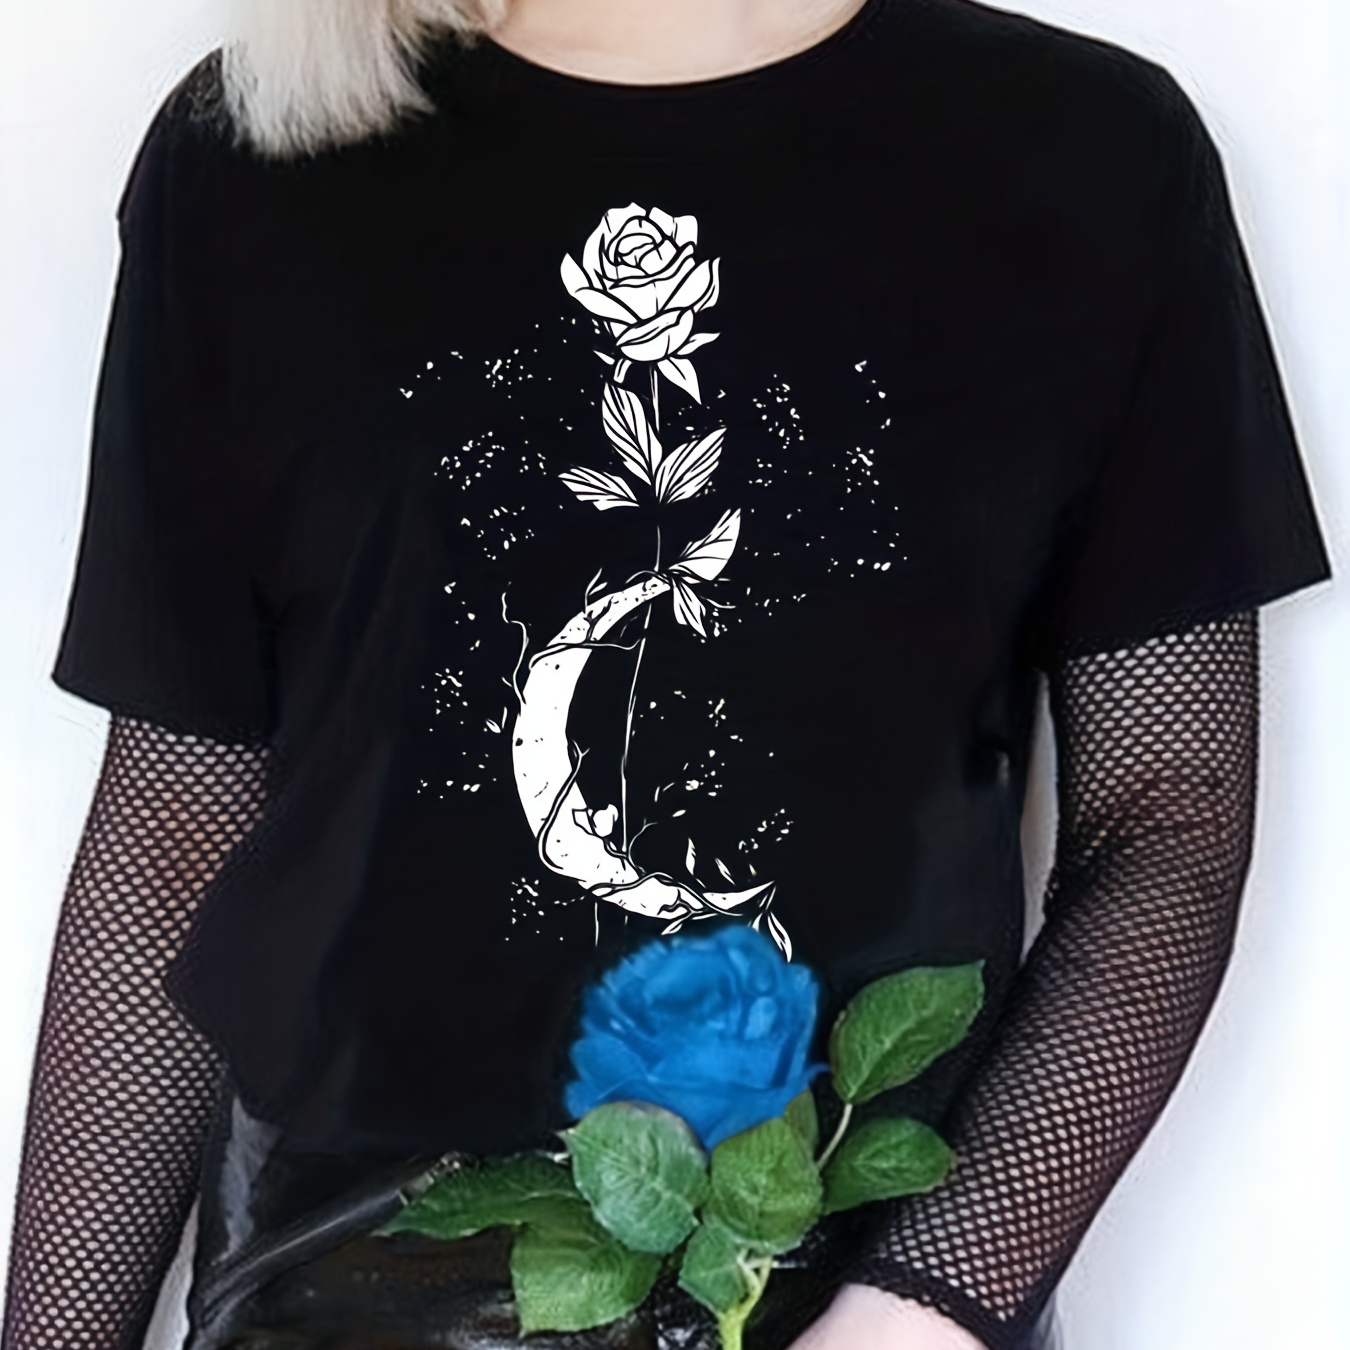 

Rose & Moon Print Goth Style Tee, Casual Short Sleeve T-shirt For Spring & Summer, Women's Clothing For Y2k/grunge Style